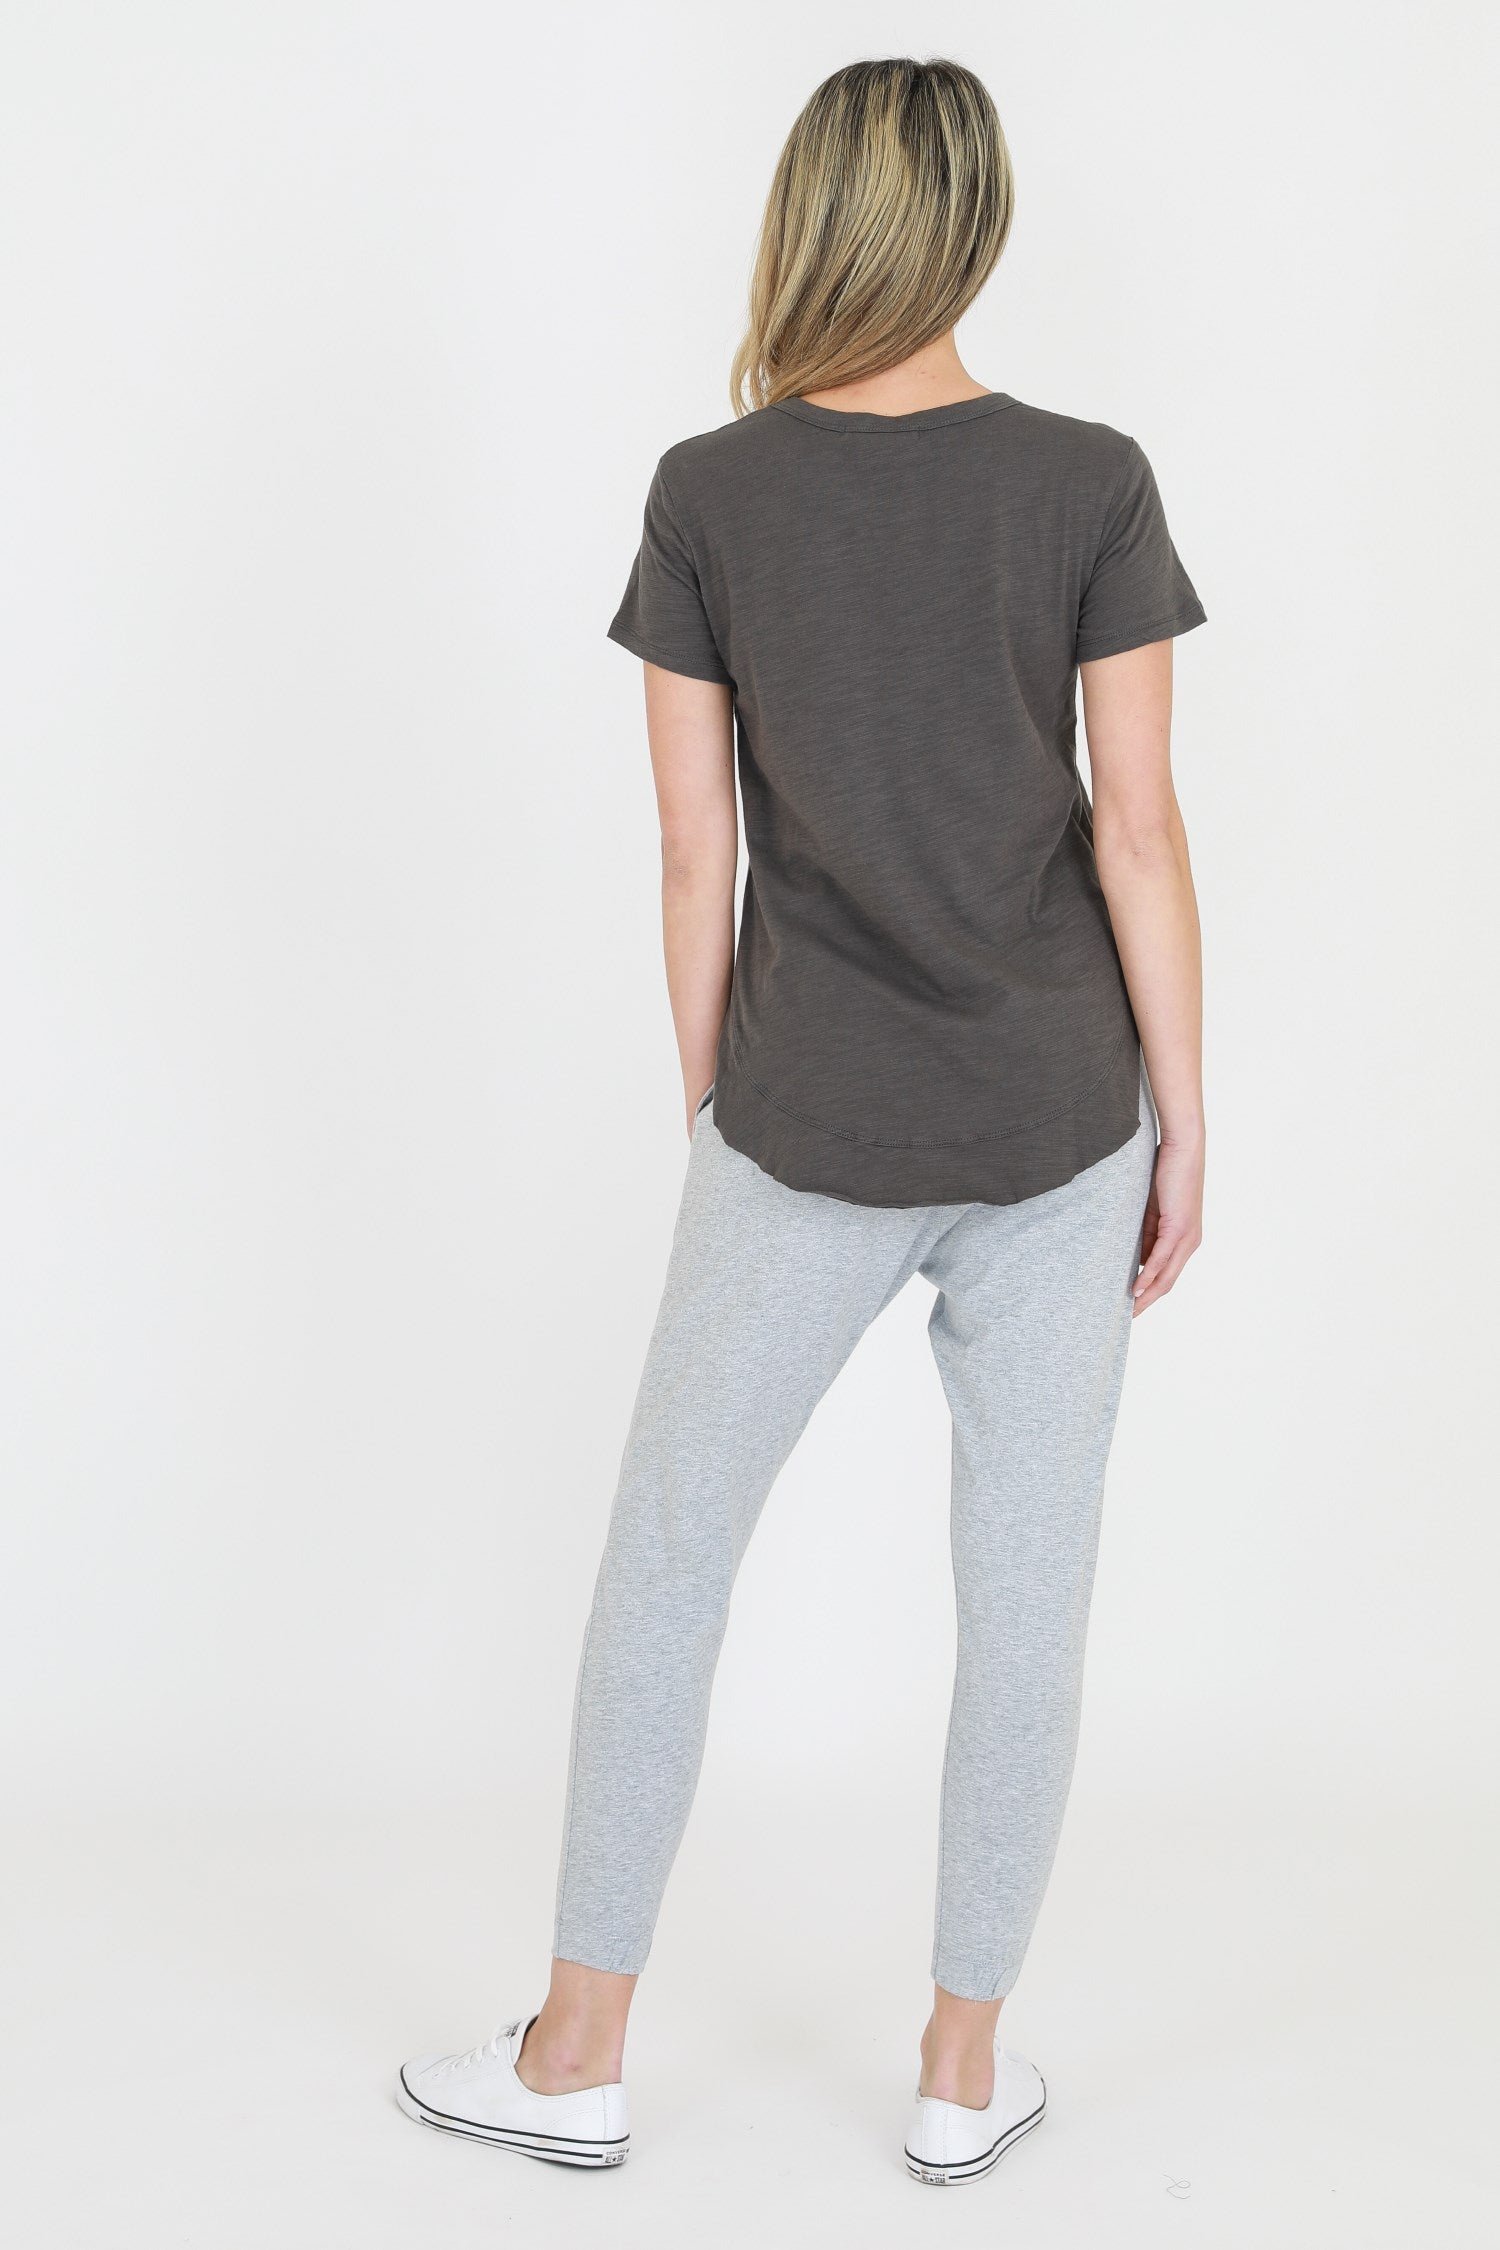 grey t-shirt womens #color_charcoal